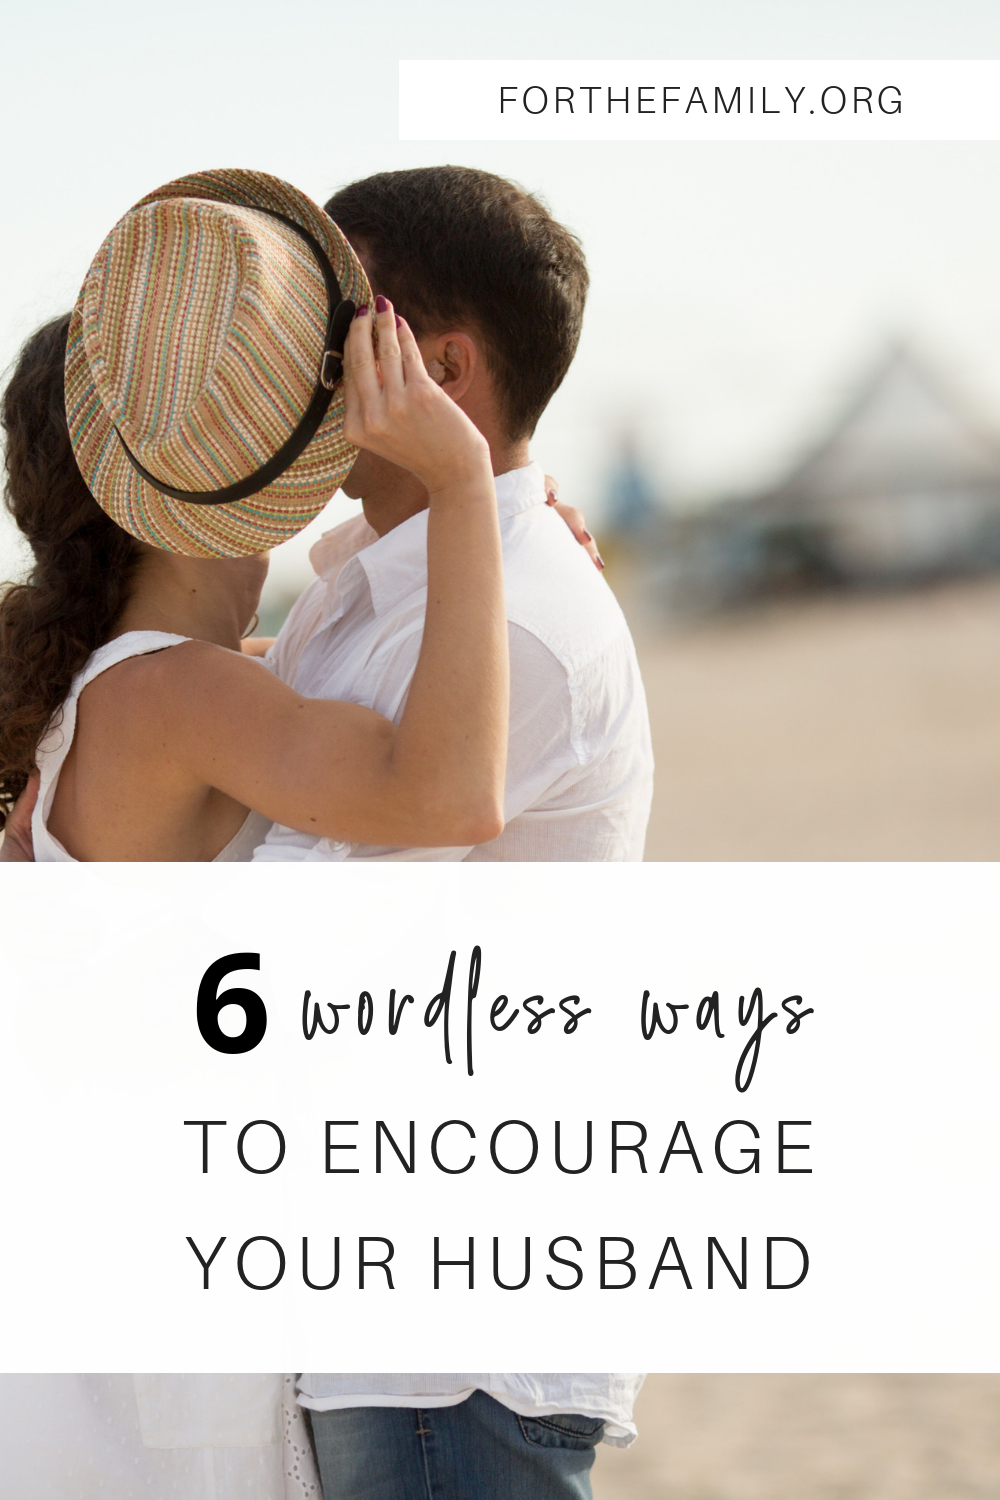 Do you want to show your husband you love and appreciate him, but aren't sure how? These ideas to show encouragement and care are sure to reach his heart and bring you closer.